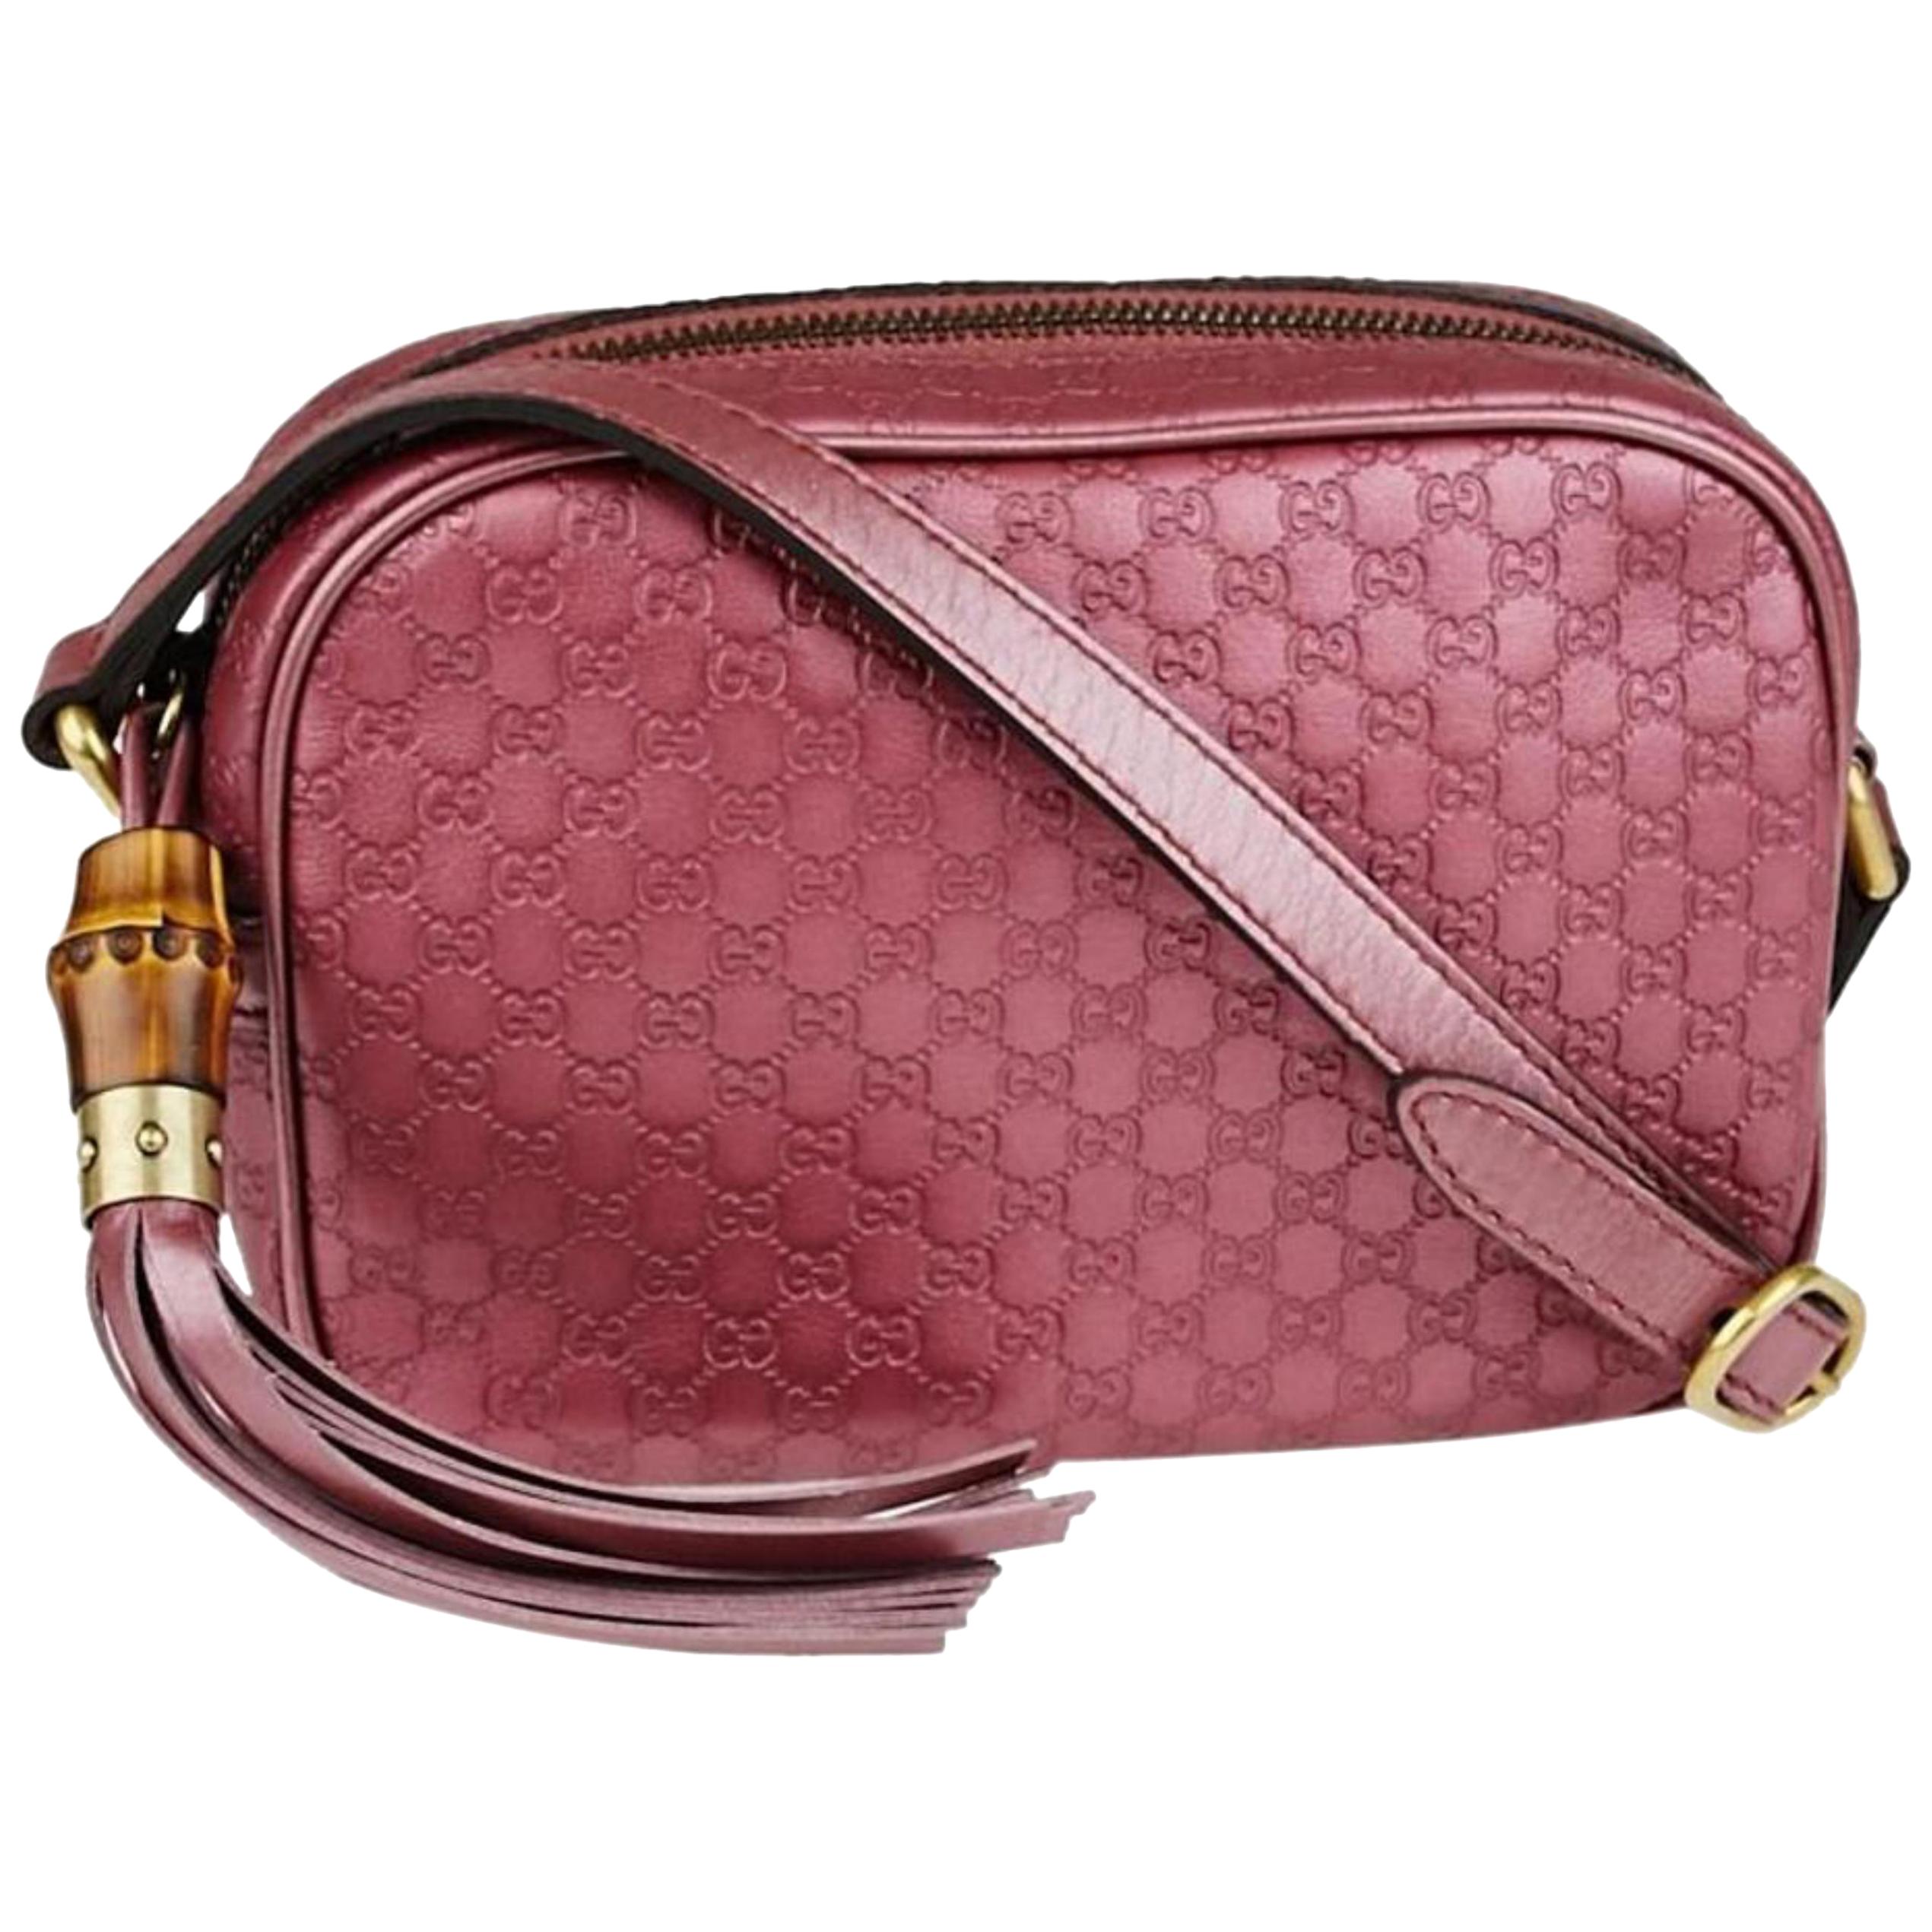 Gucci Soho Guccissima Sunshine Disco 866100 Rose (Pink) Leather Cross Body Bag For Sale